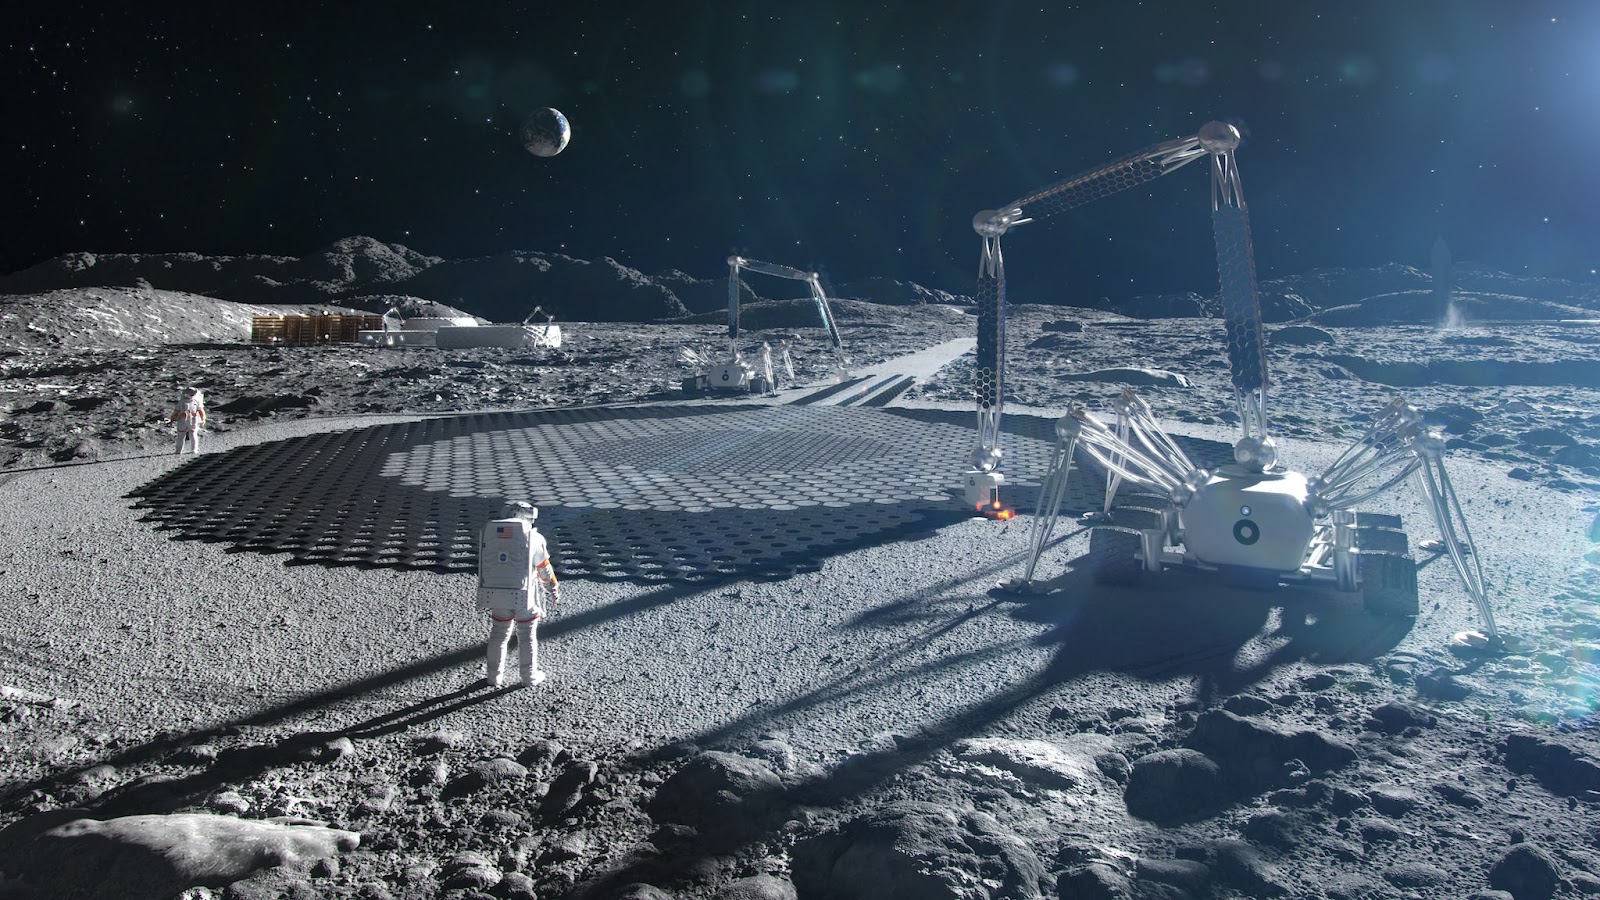 A rendering of an ICON robot performing construction on the moon